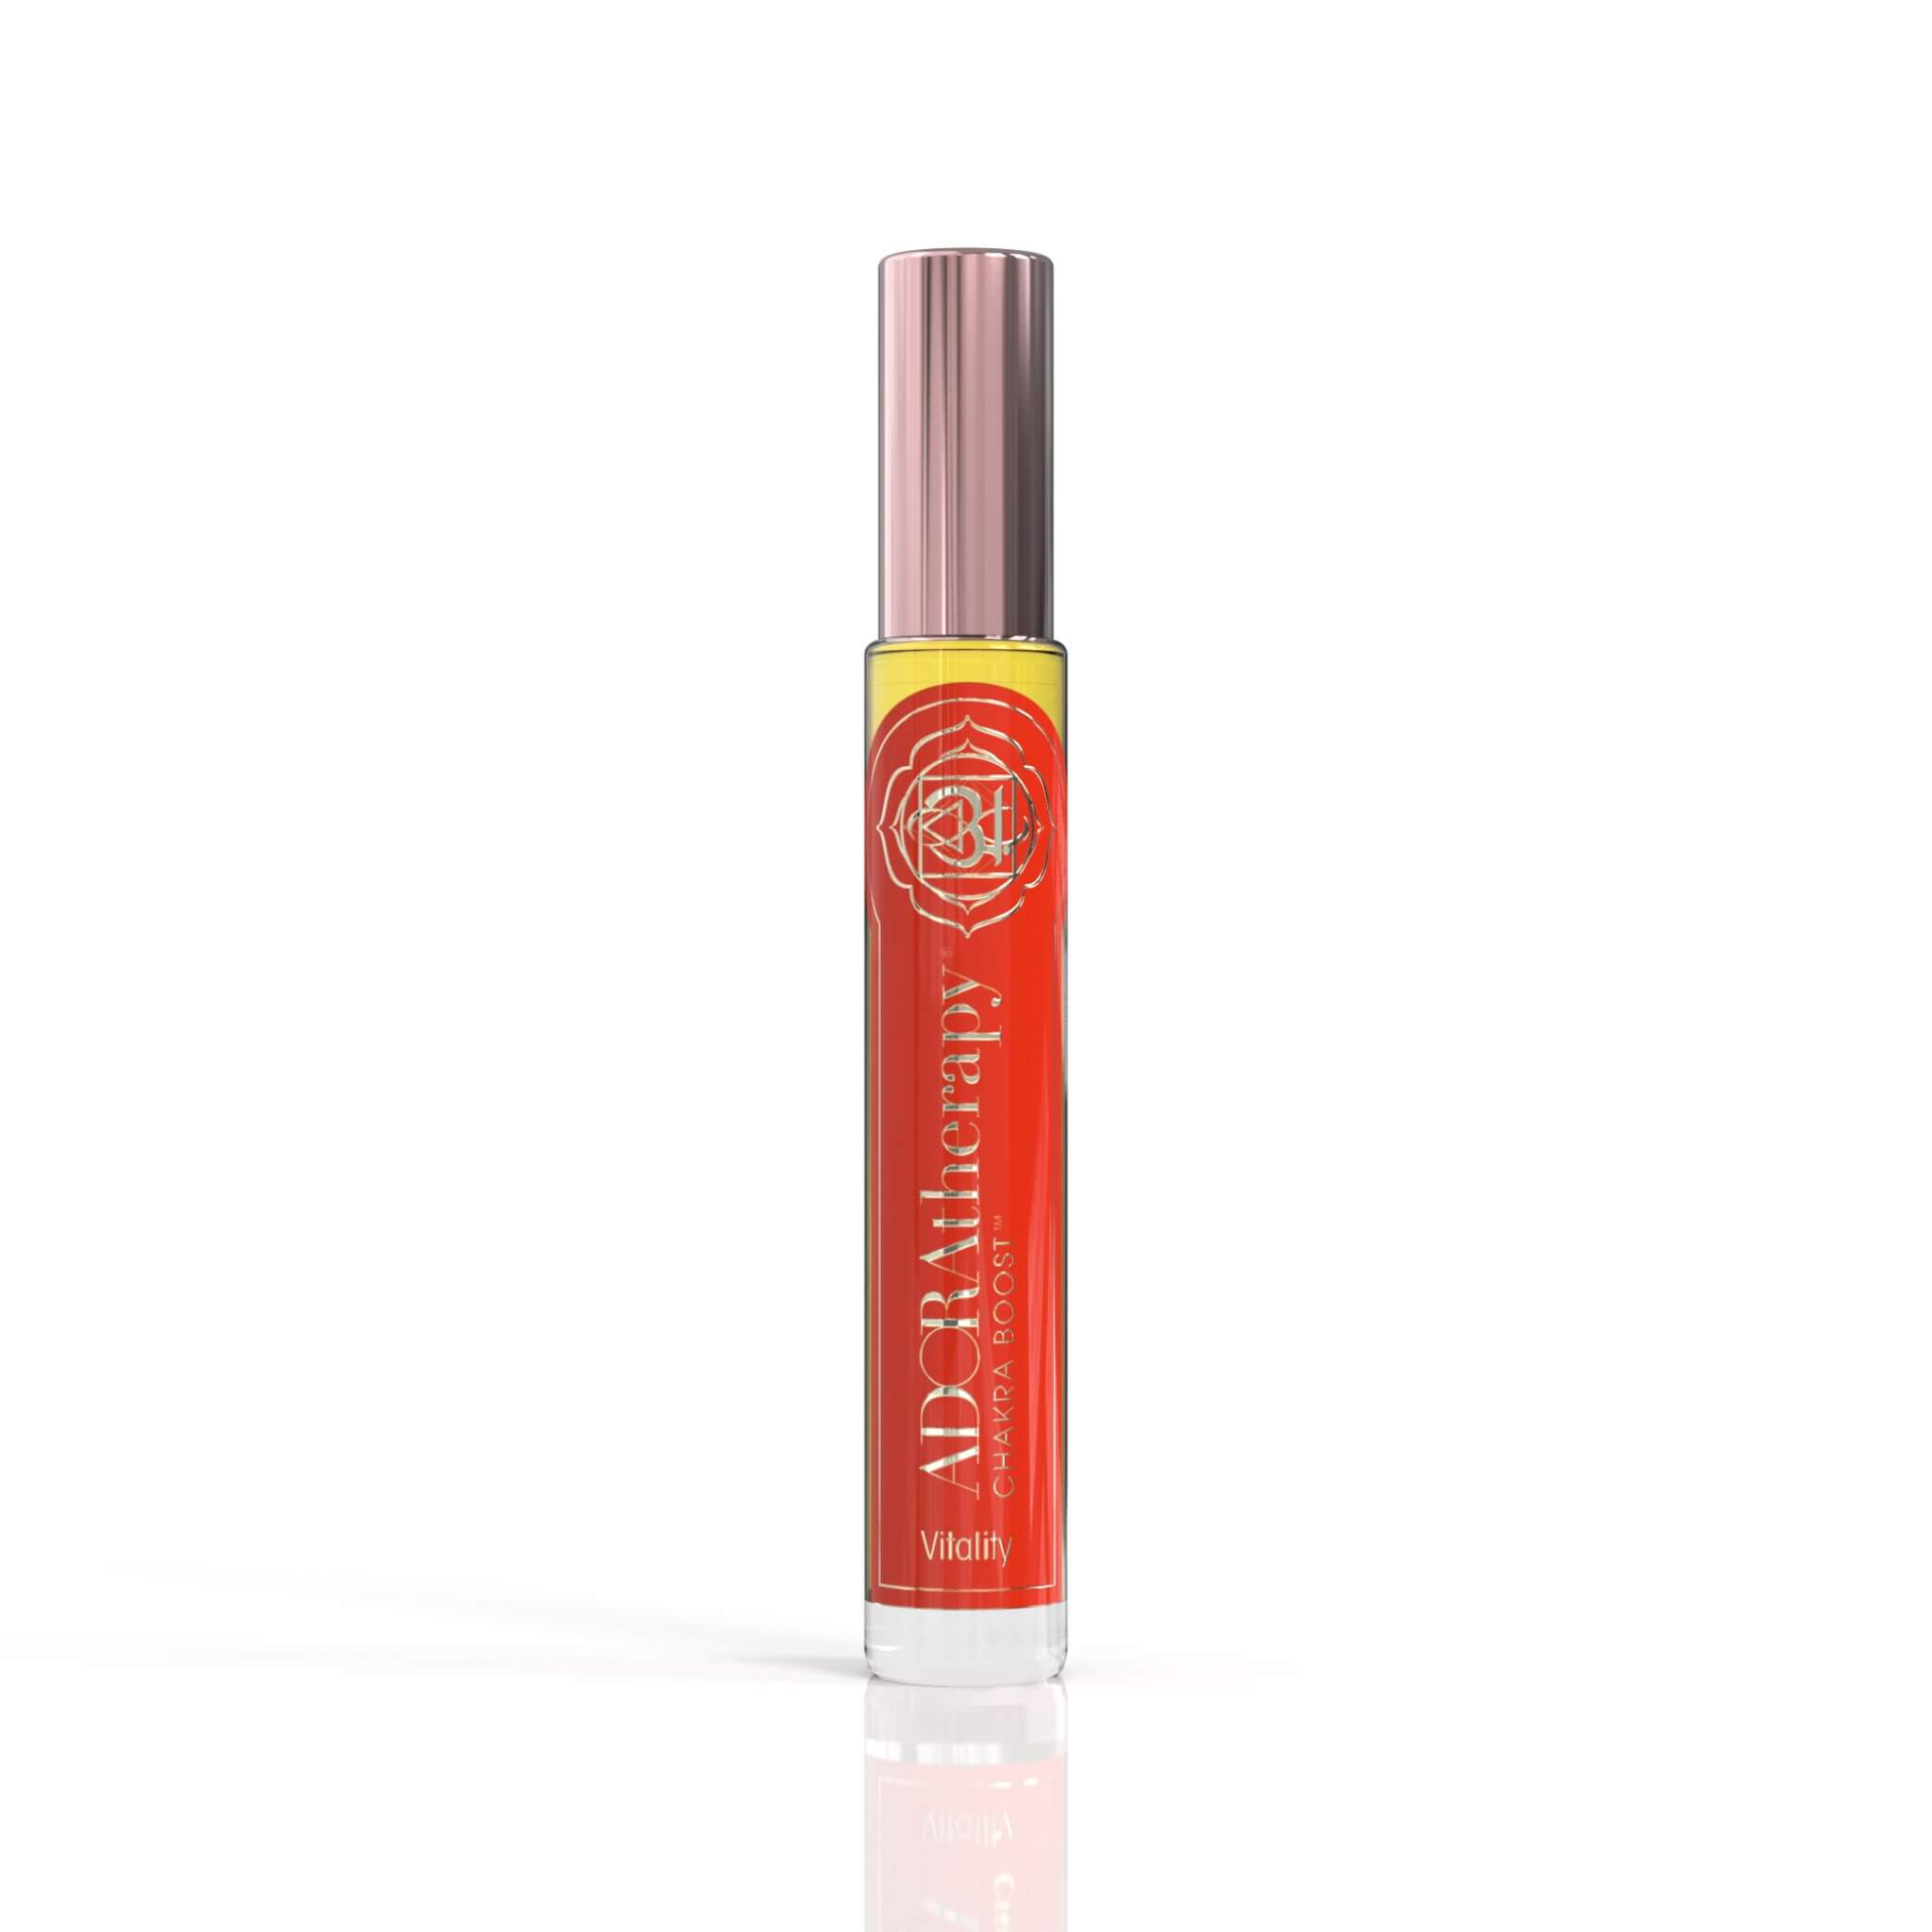 Chakra 1 Vitality Roll On Perfume Oil by ADORAtherapy